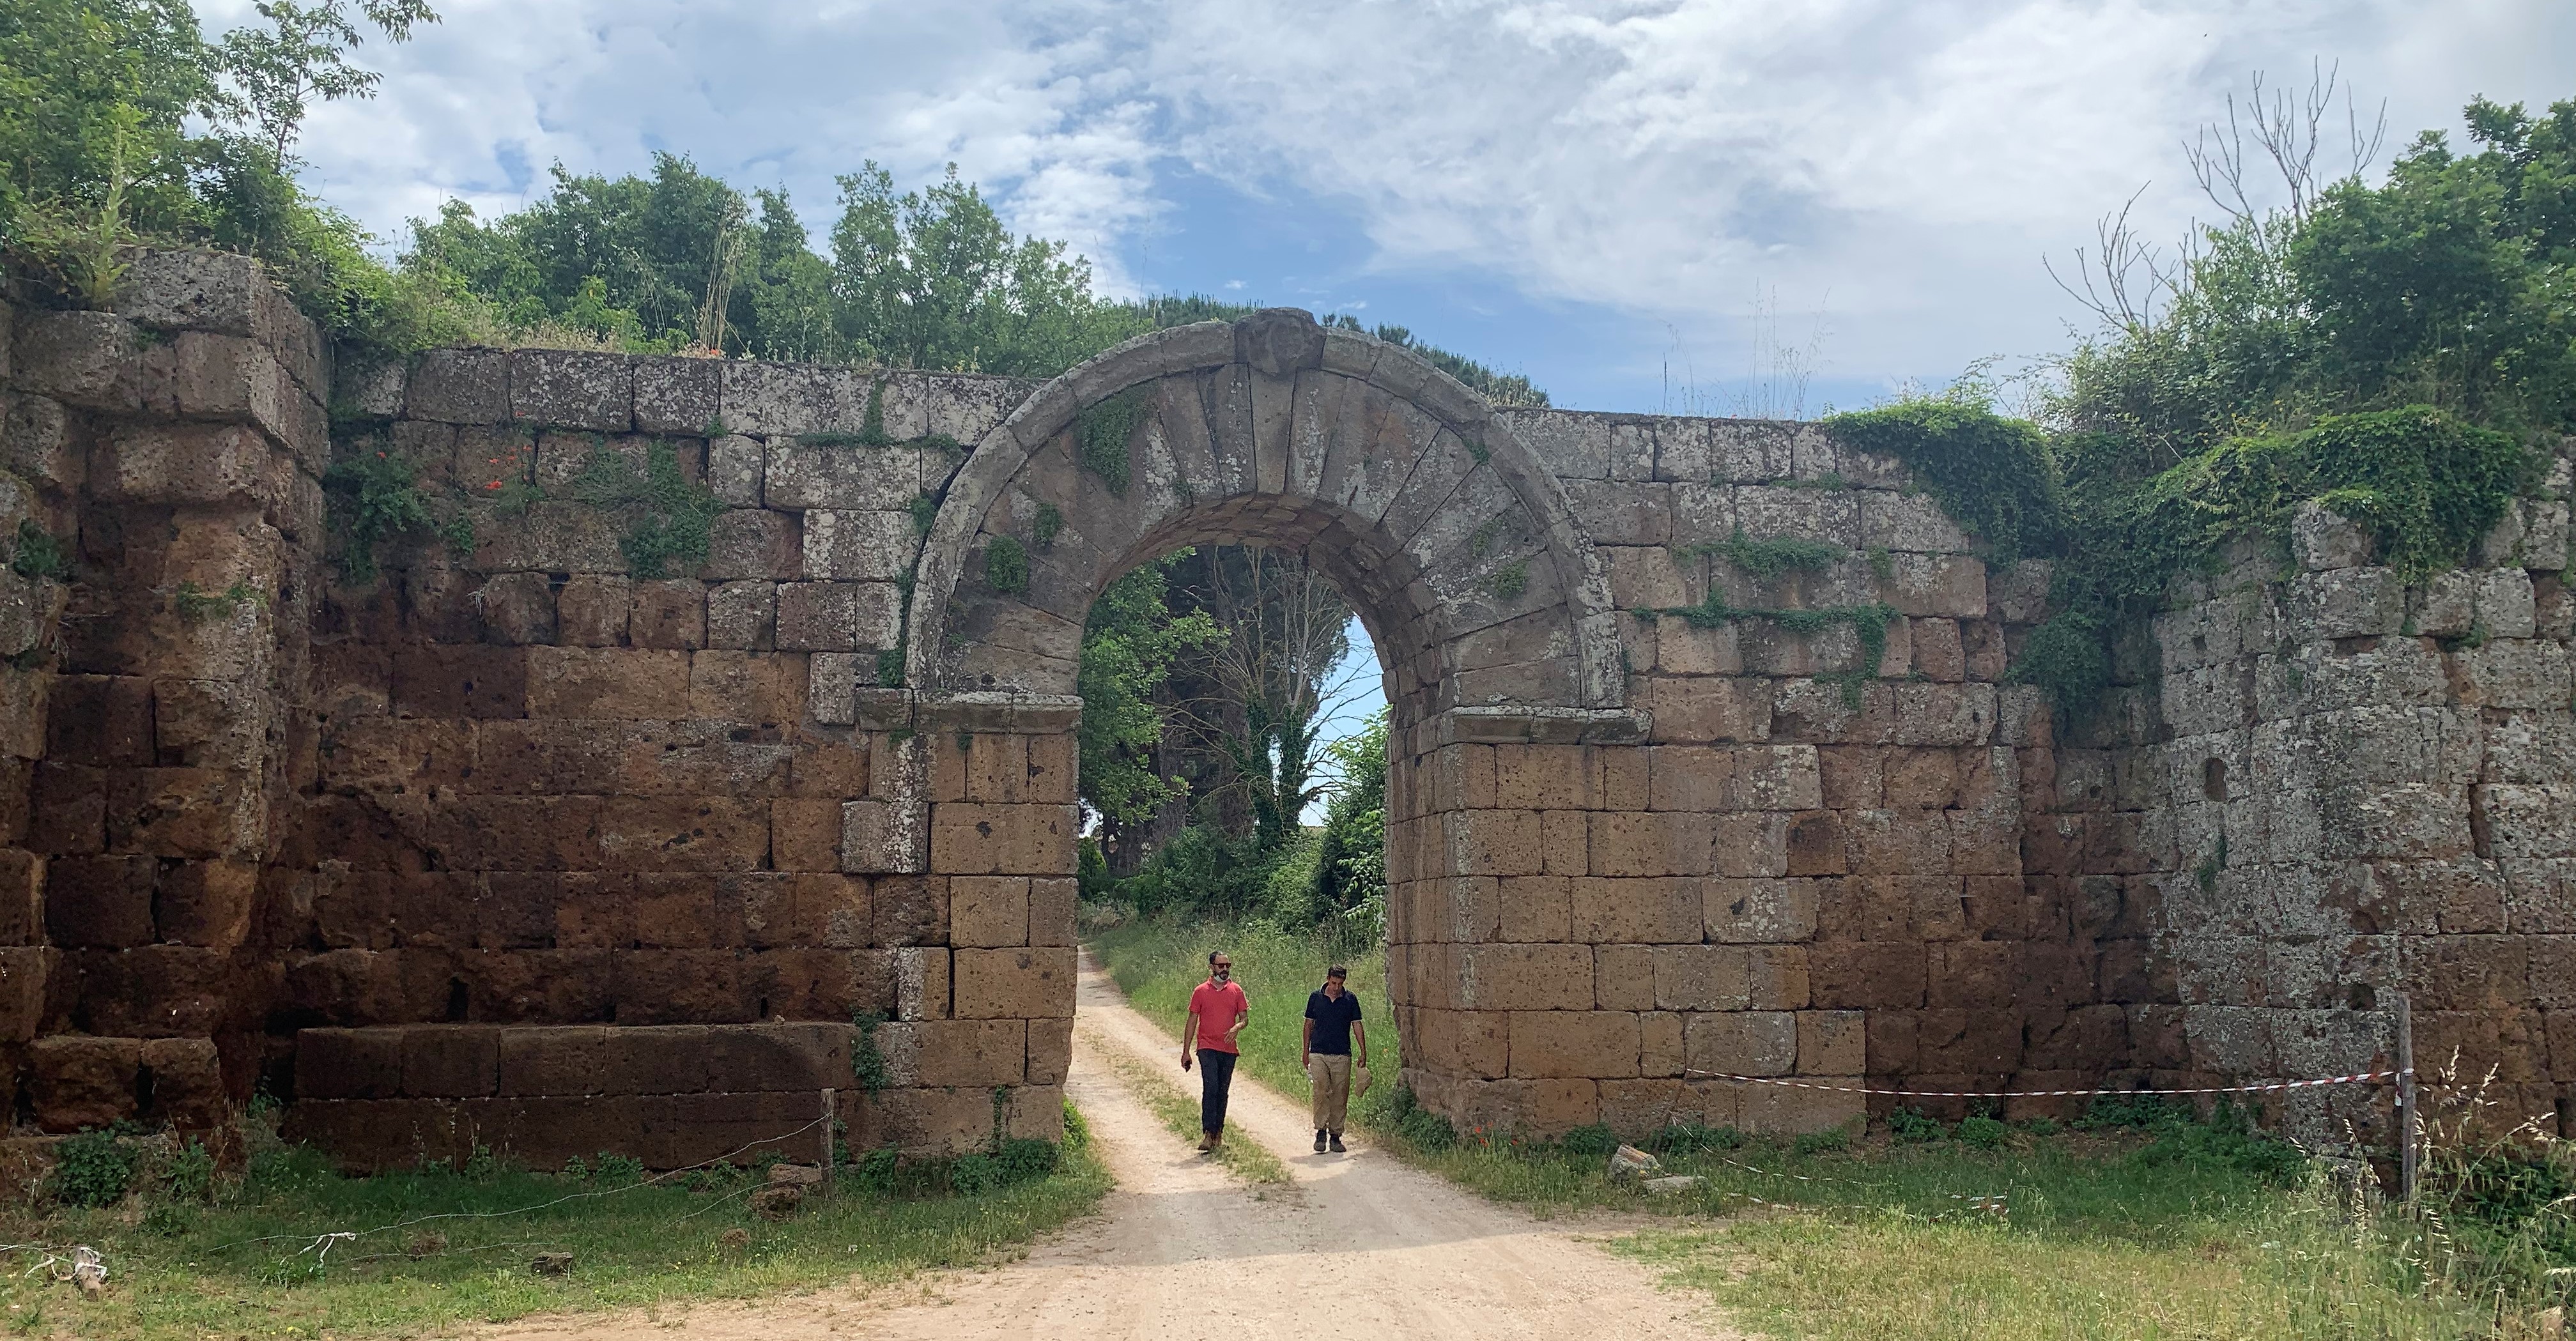 A photograph of a large roman gate with two people walking through